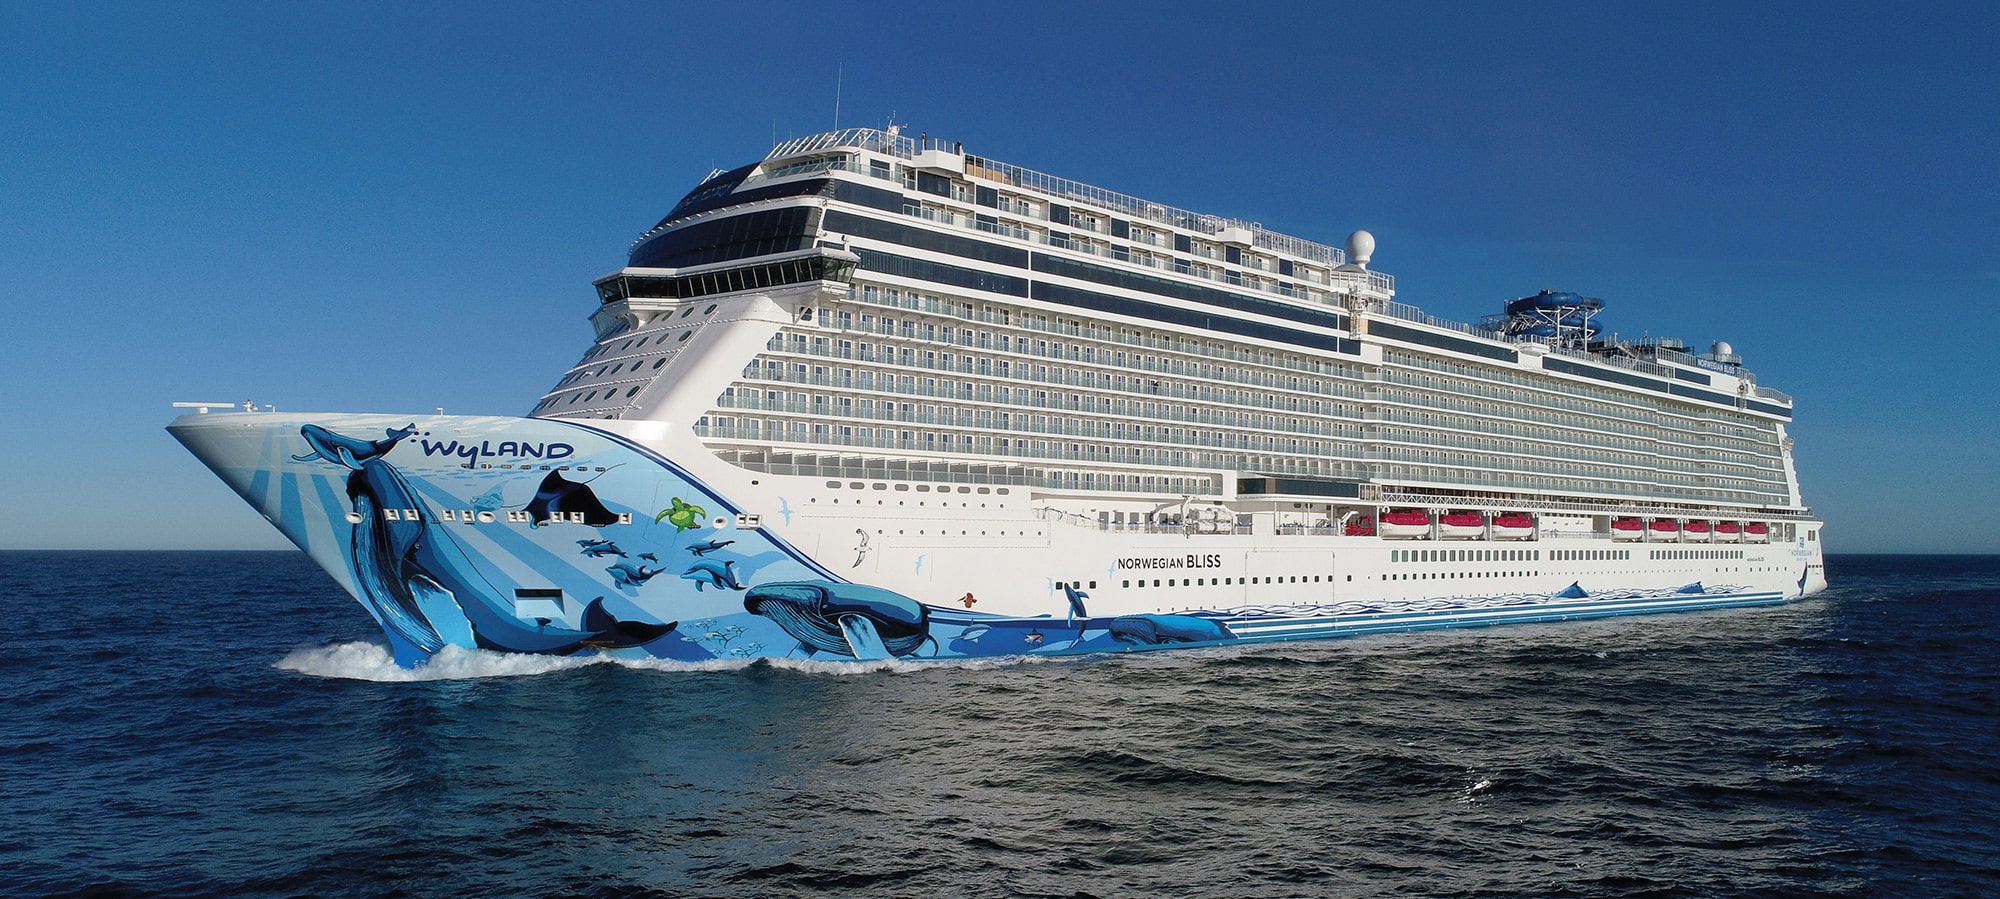 Here’s a look inside the latest ship from Norwegian Cruise Line.